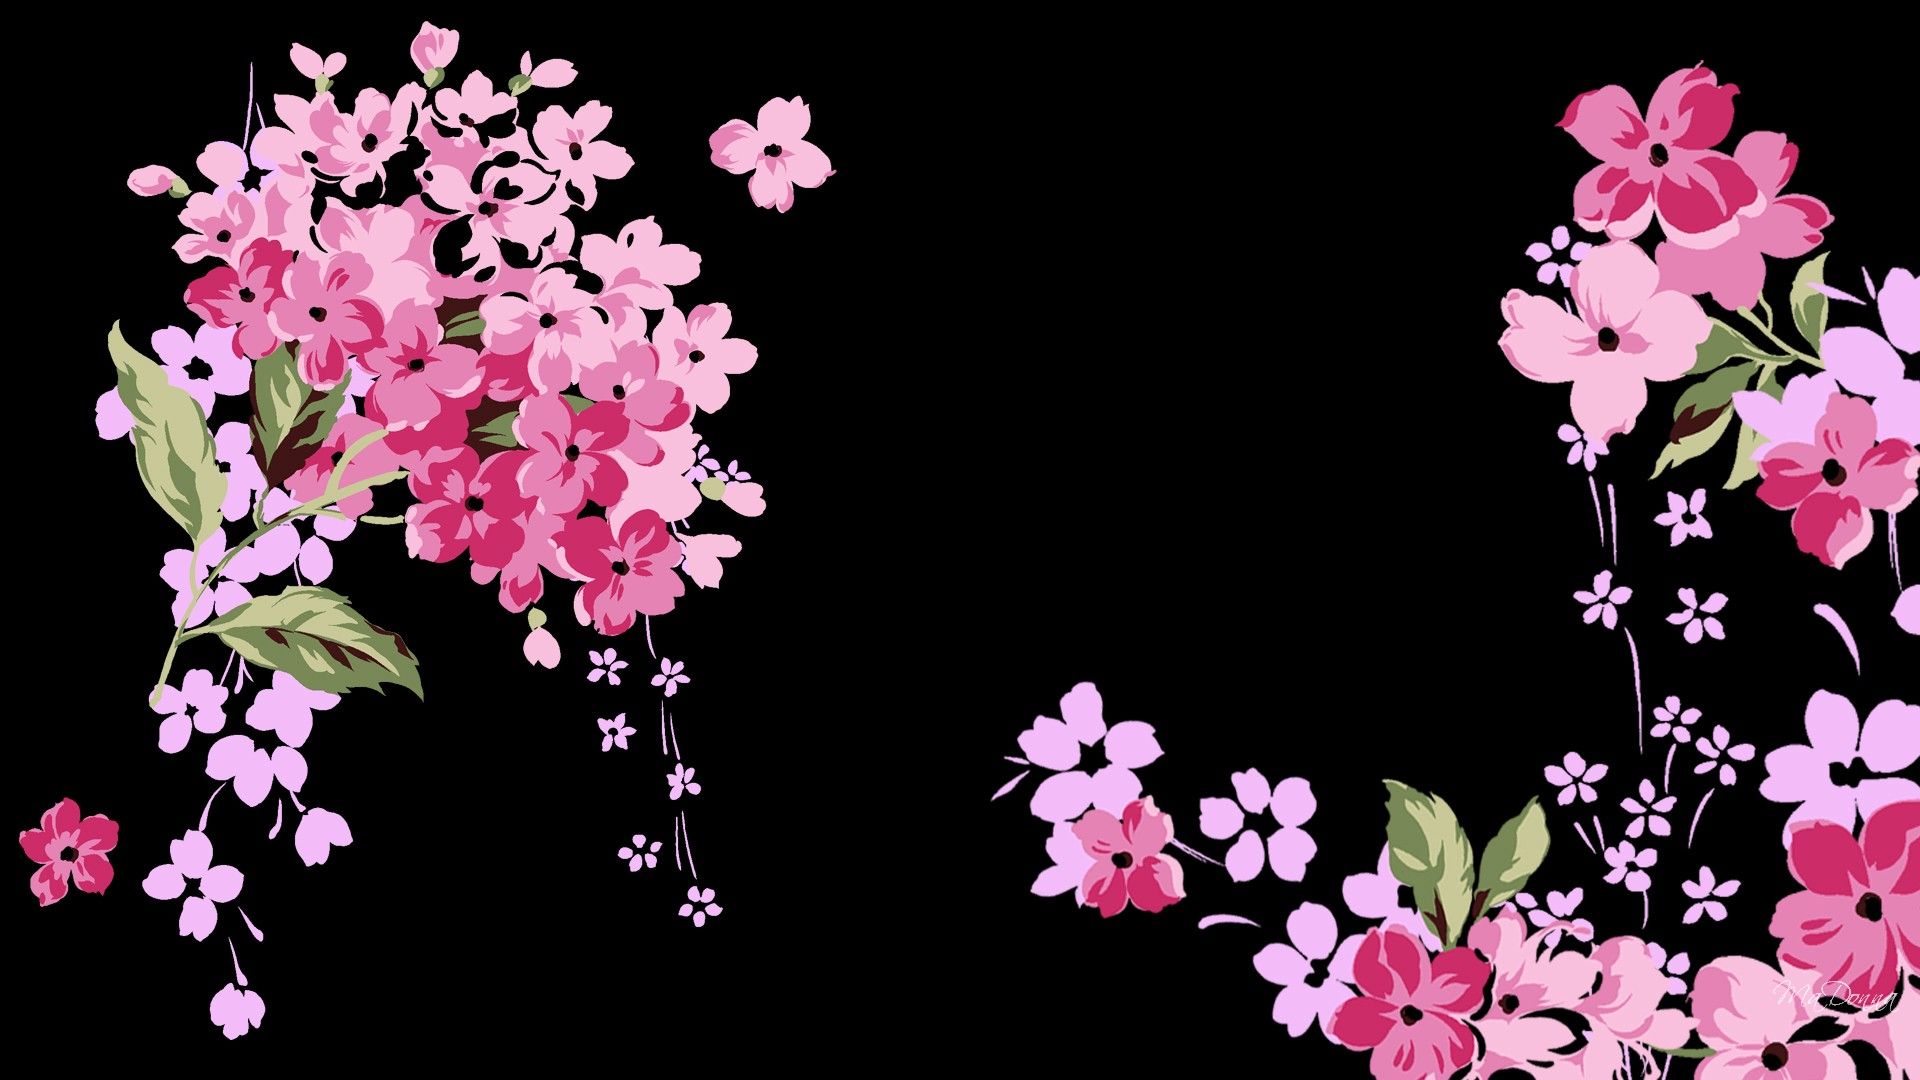 Black and Pink Girly Wallpaper Free Black and Pink Girly Background